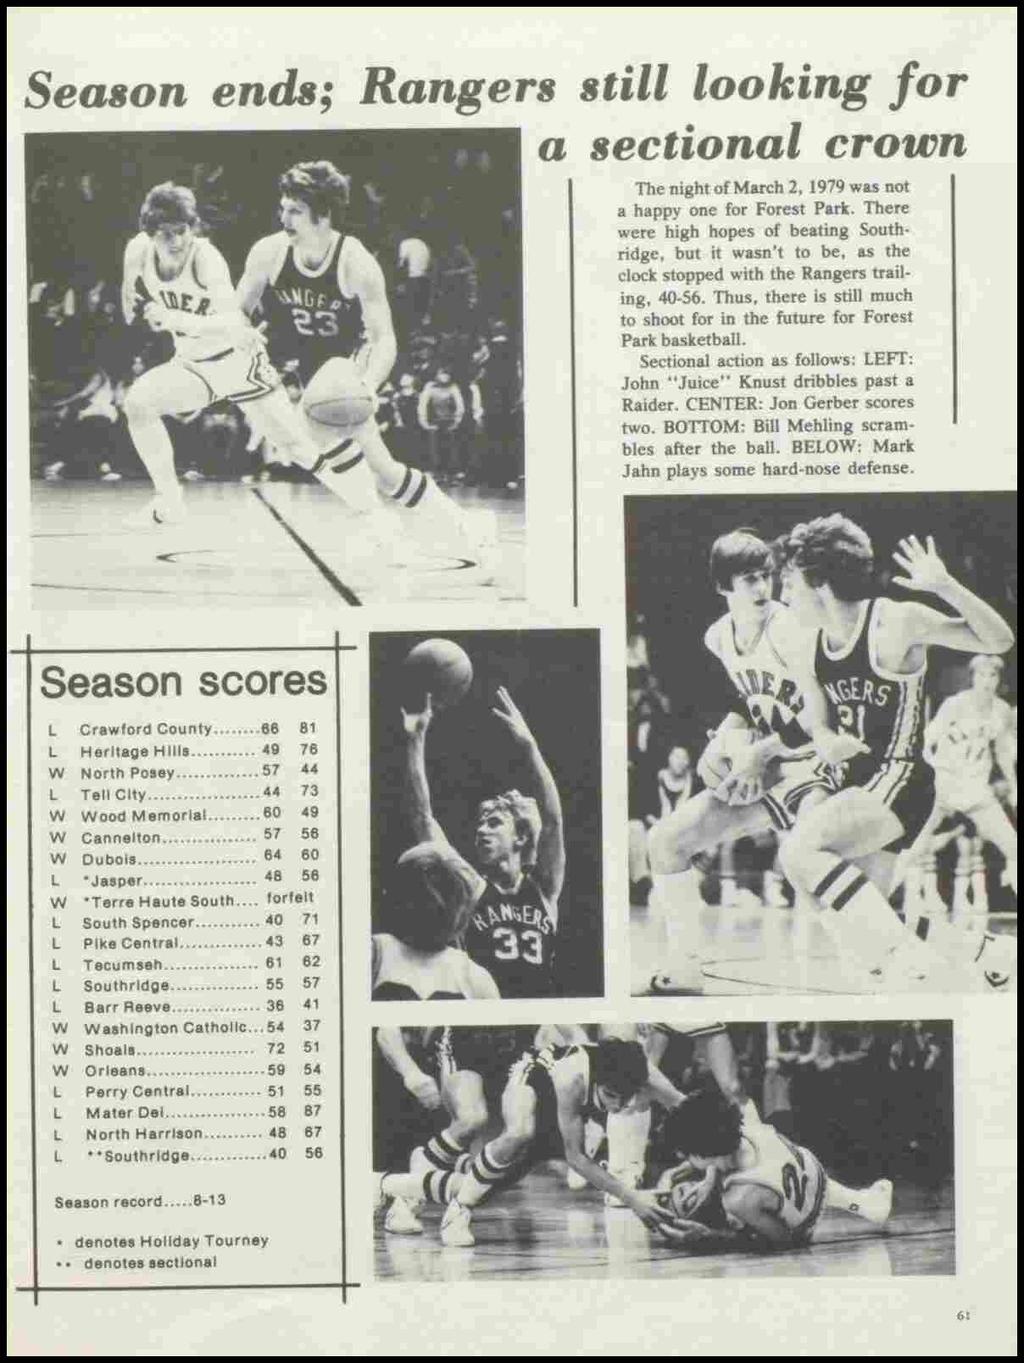 Season ends; Rangers still looking for a sectional crown The night of March 2, 1979 was not a happy one for Forest Park.